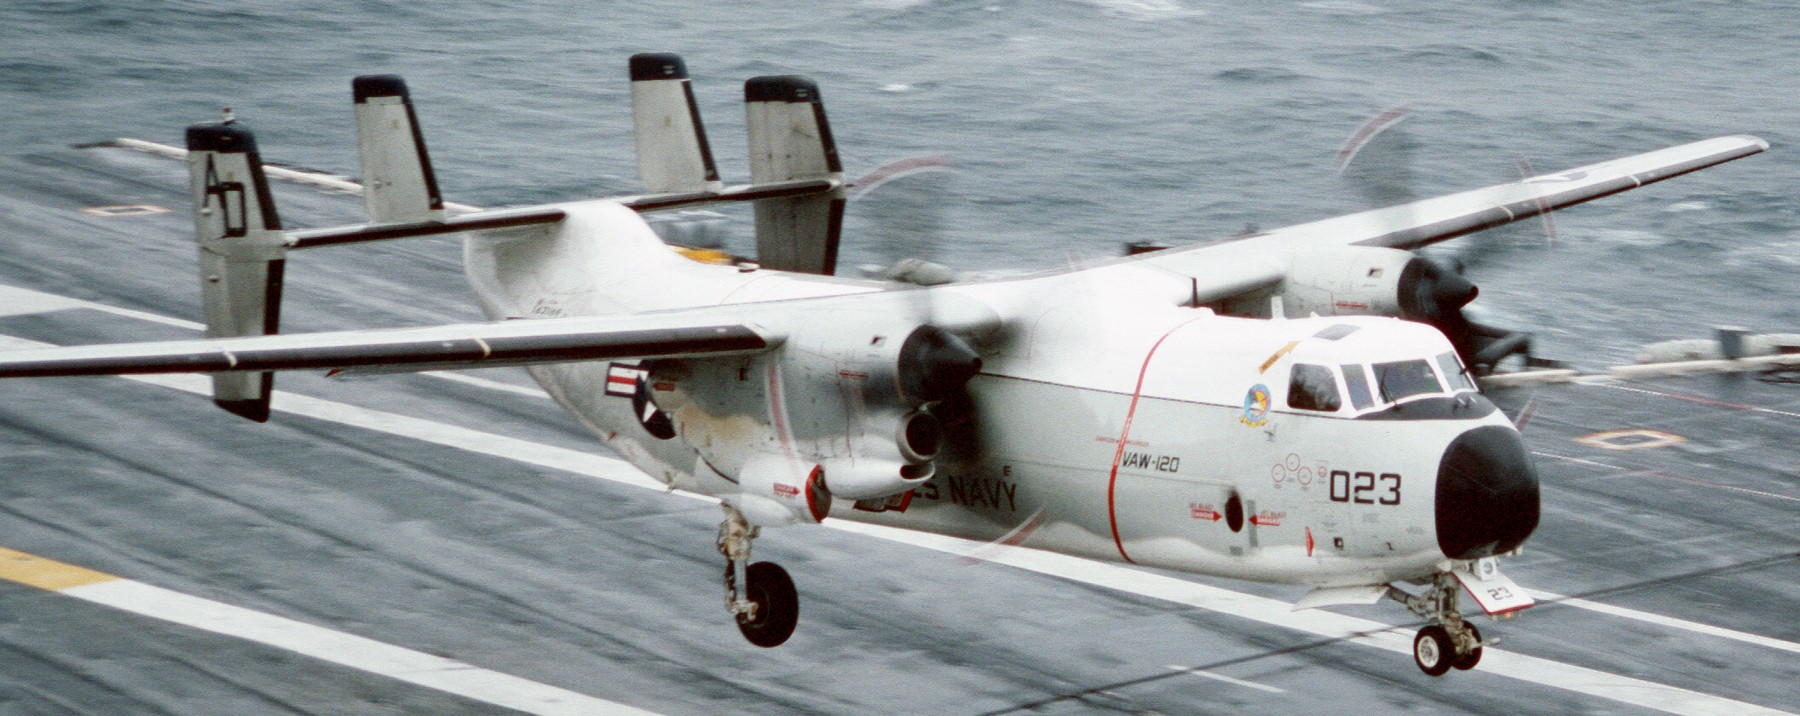 vaw-120 greyhawks carrier airborne early warning squadron c-2a greyhound replacement uss dwight d. eisenhower cvn-69 129